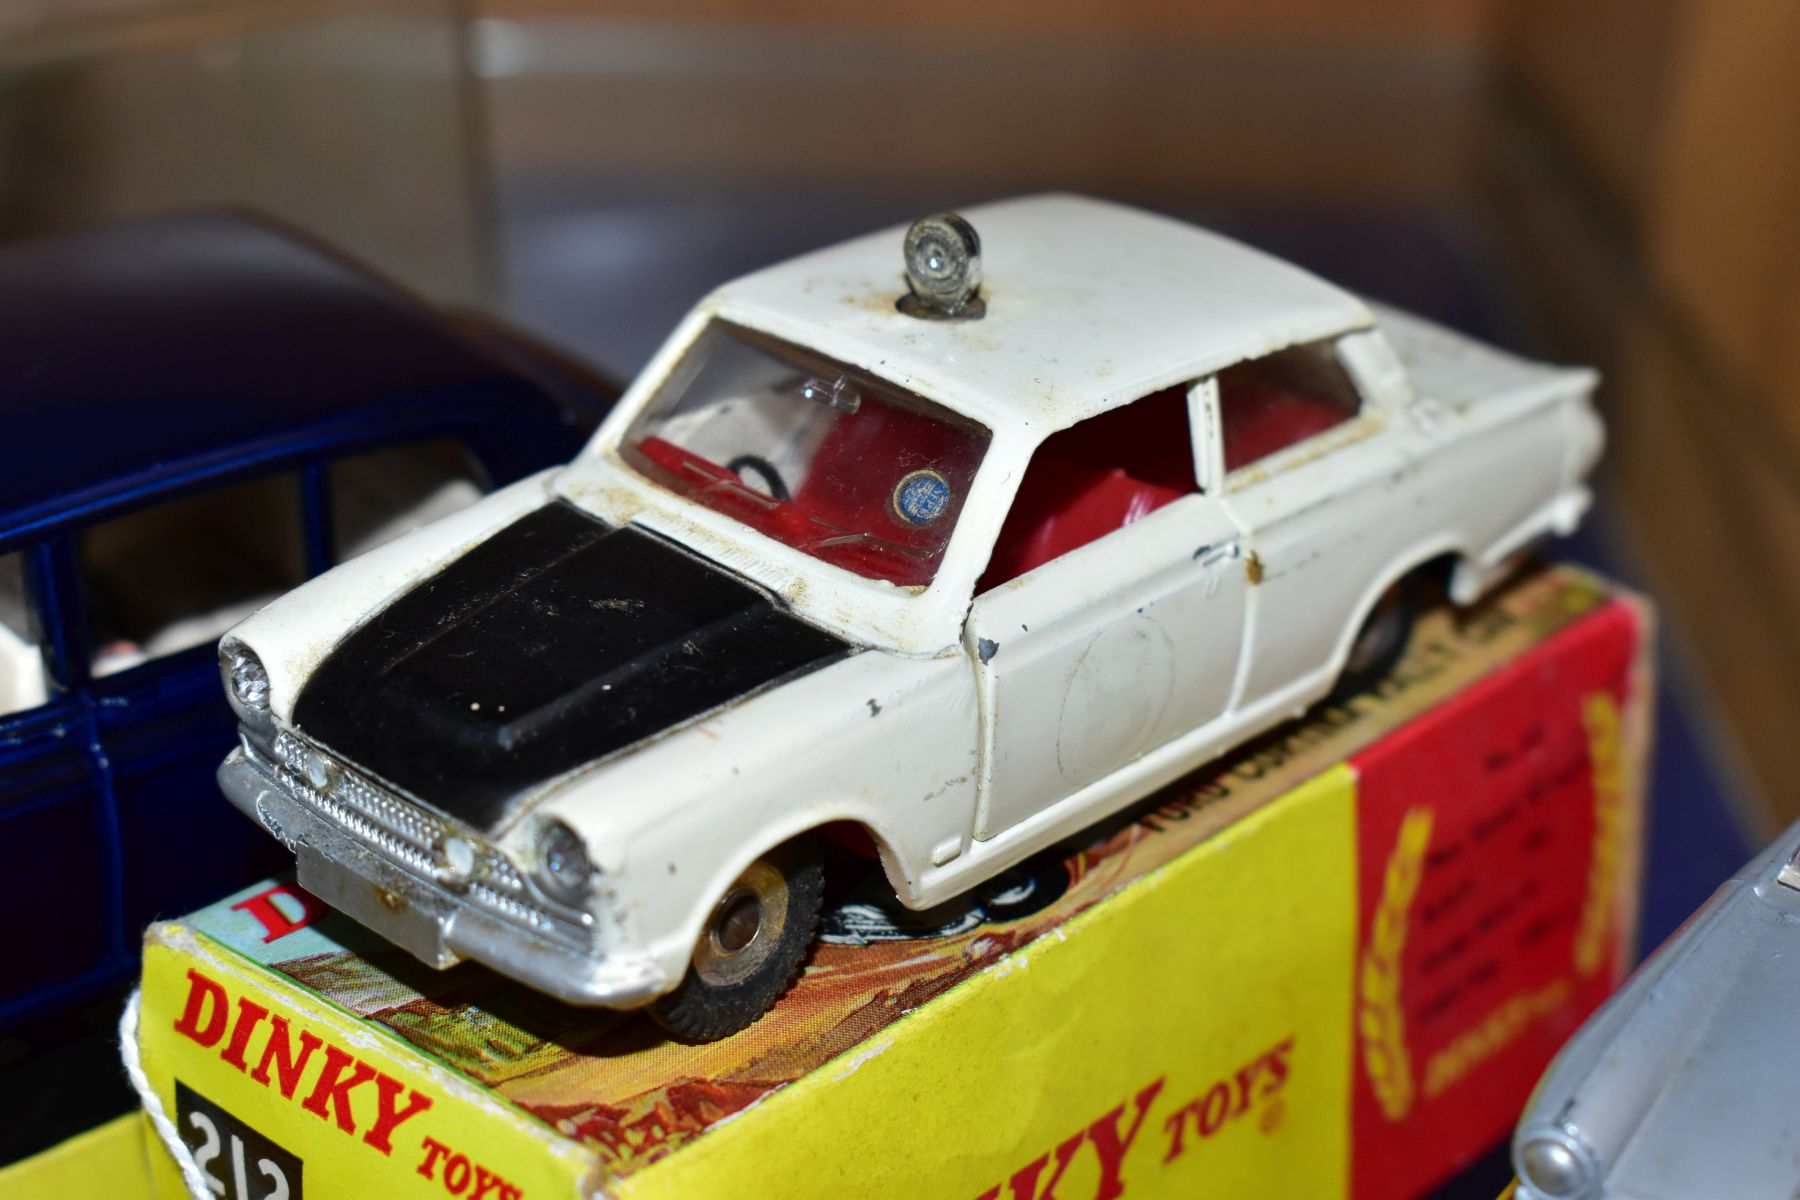 THREE BOXED DINKY TOYS CARS, Truimph Spitfire, No 114 metallic silver grey body, red interior, - Image 5 of 9